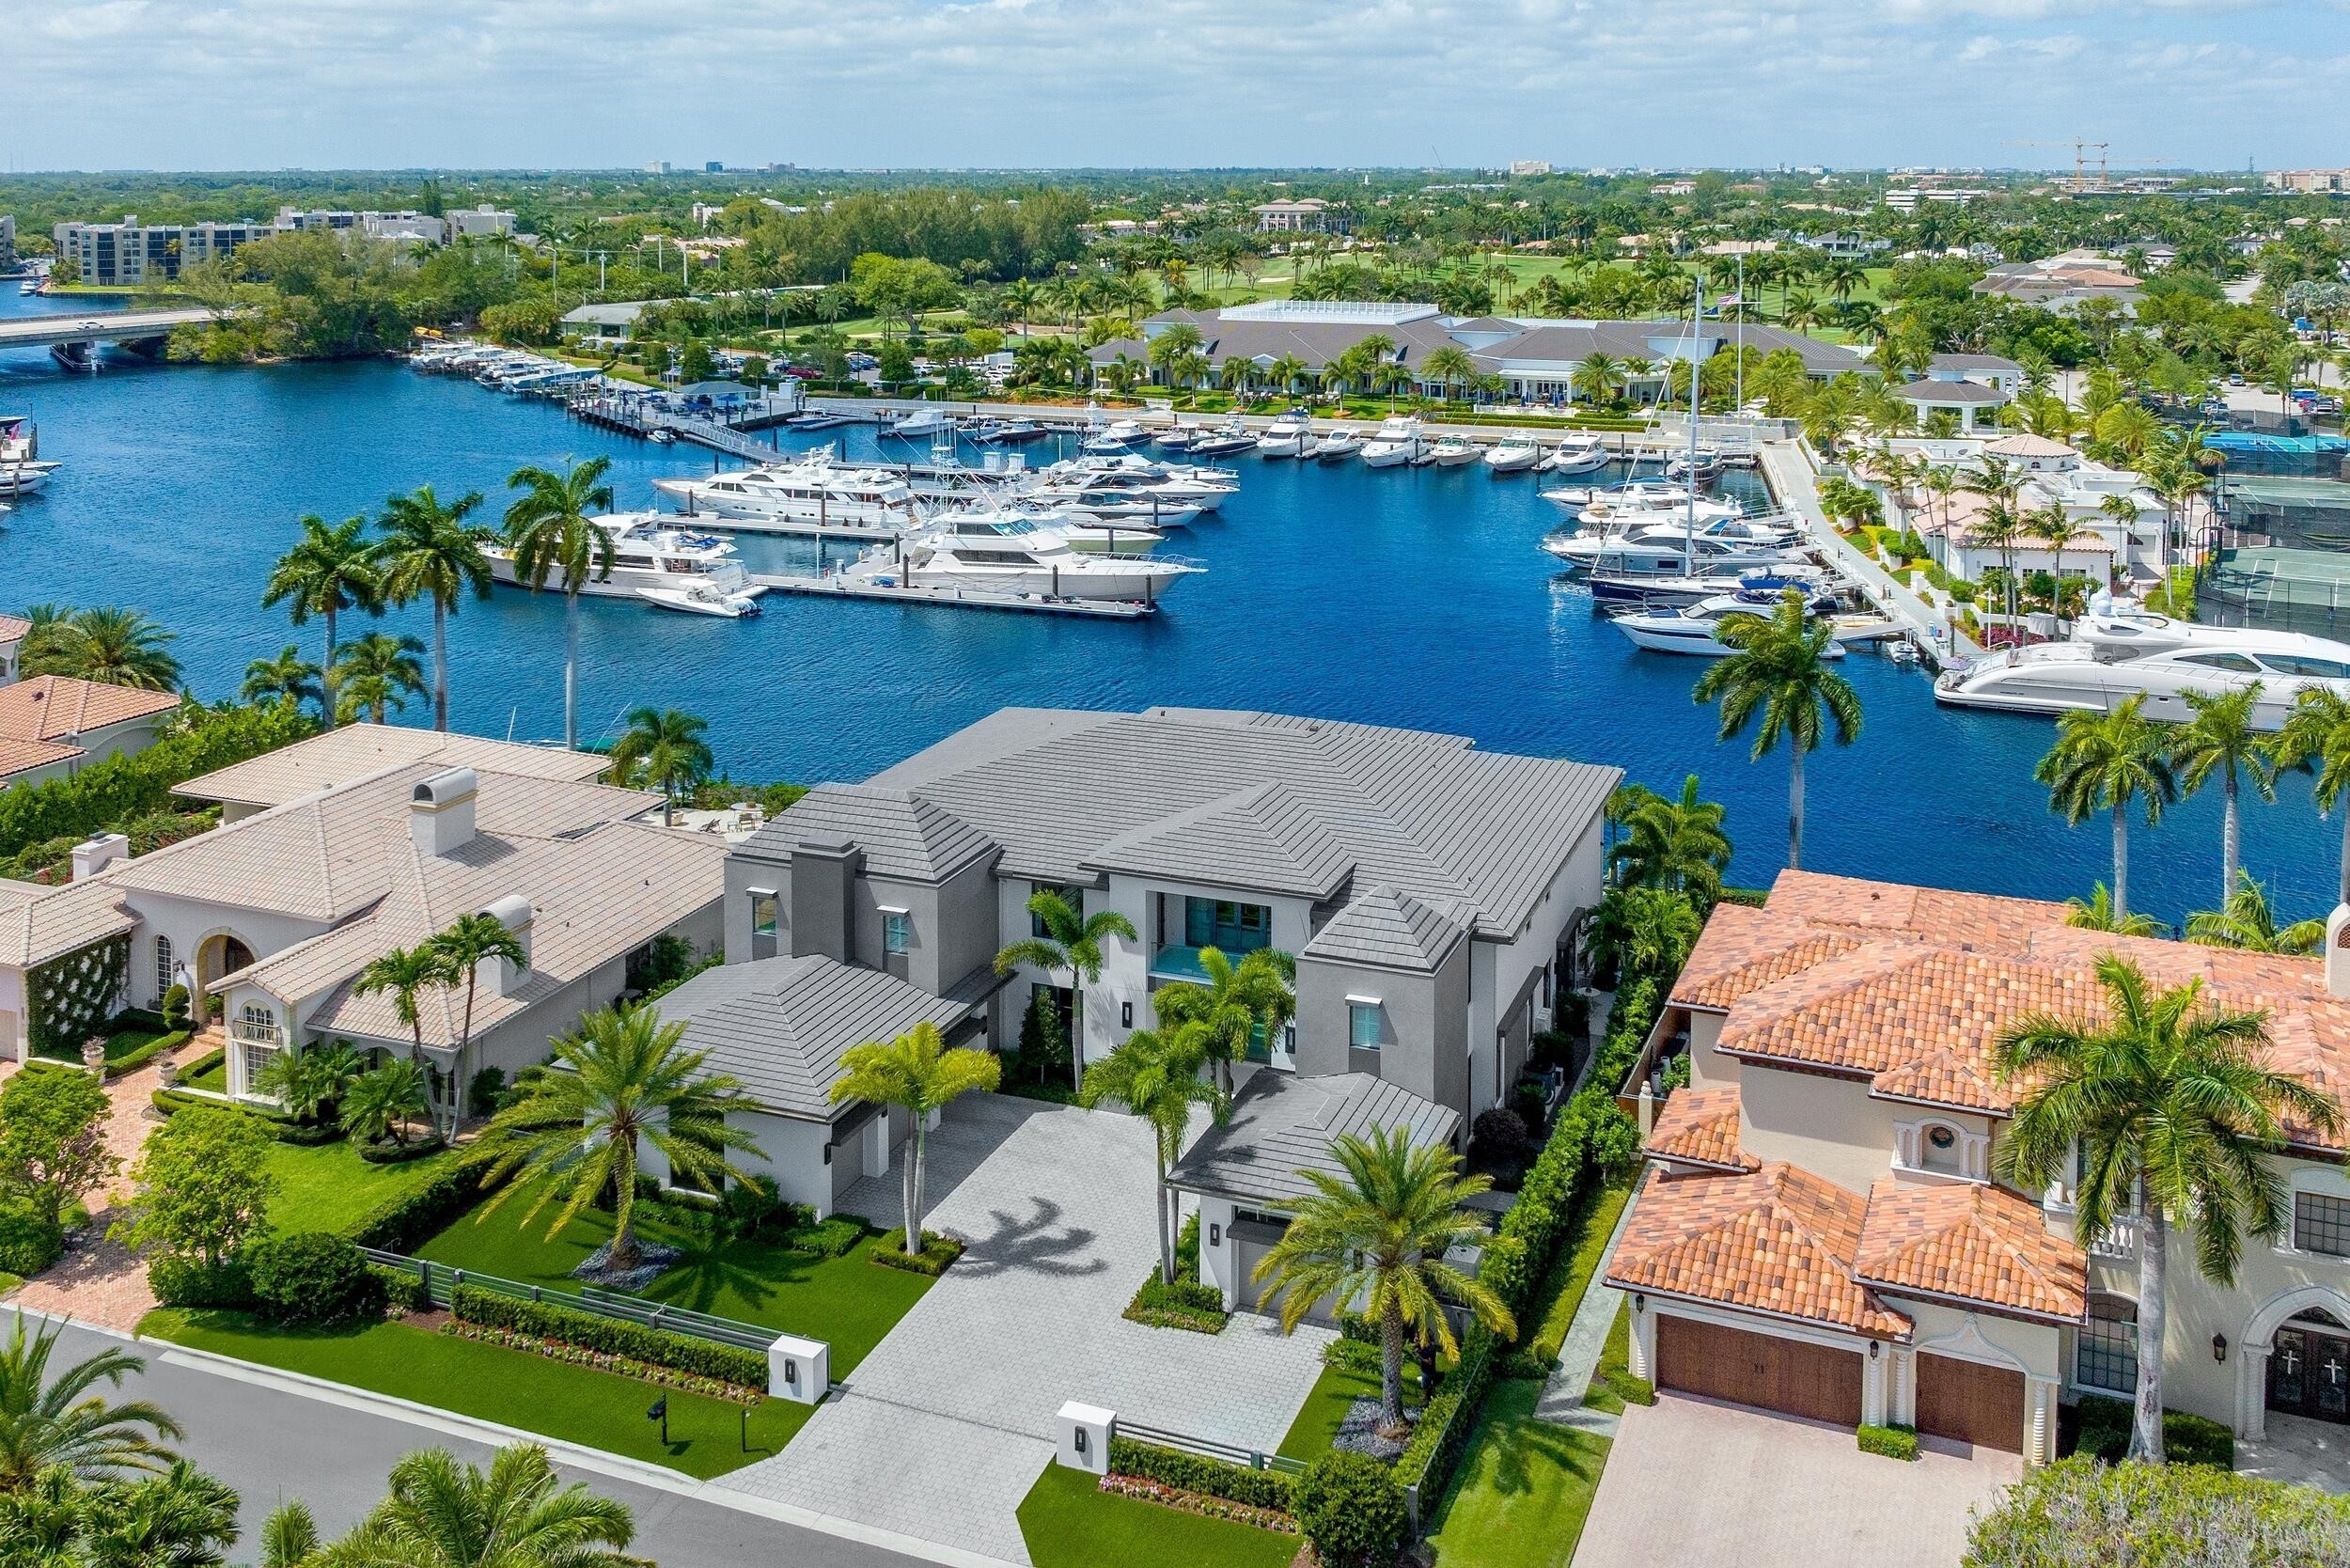 Single Family Home for Sale at Royal Palm Yacht and Country Club, Boca Raton, FL 33432